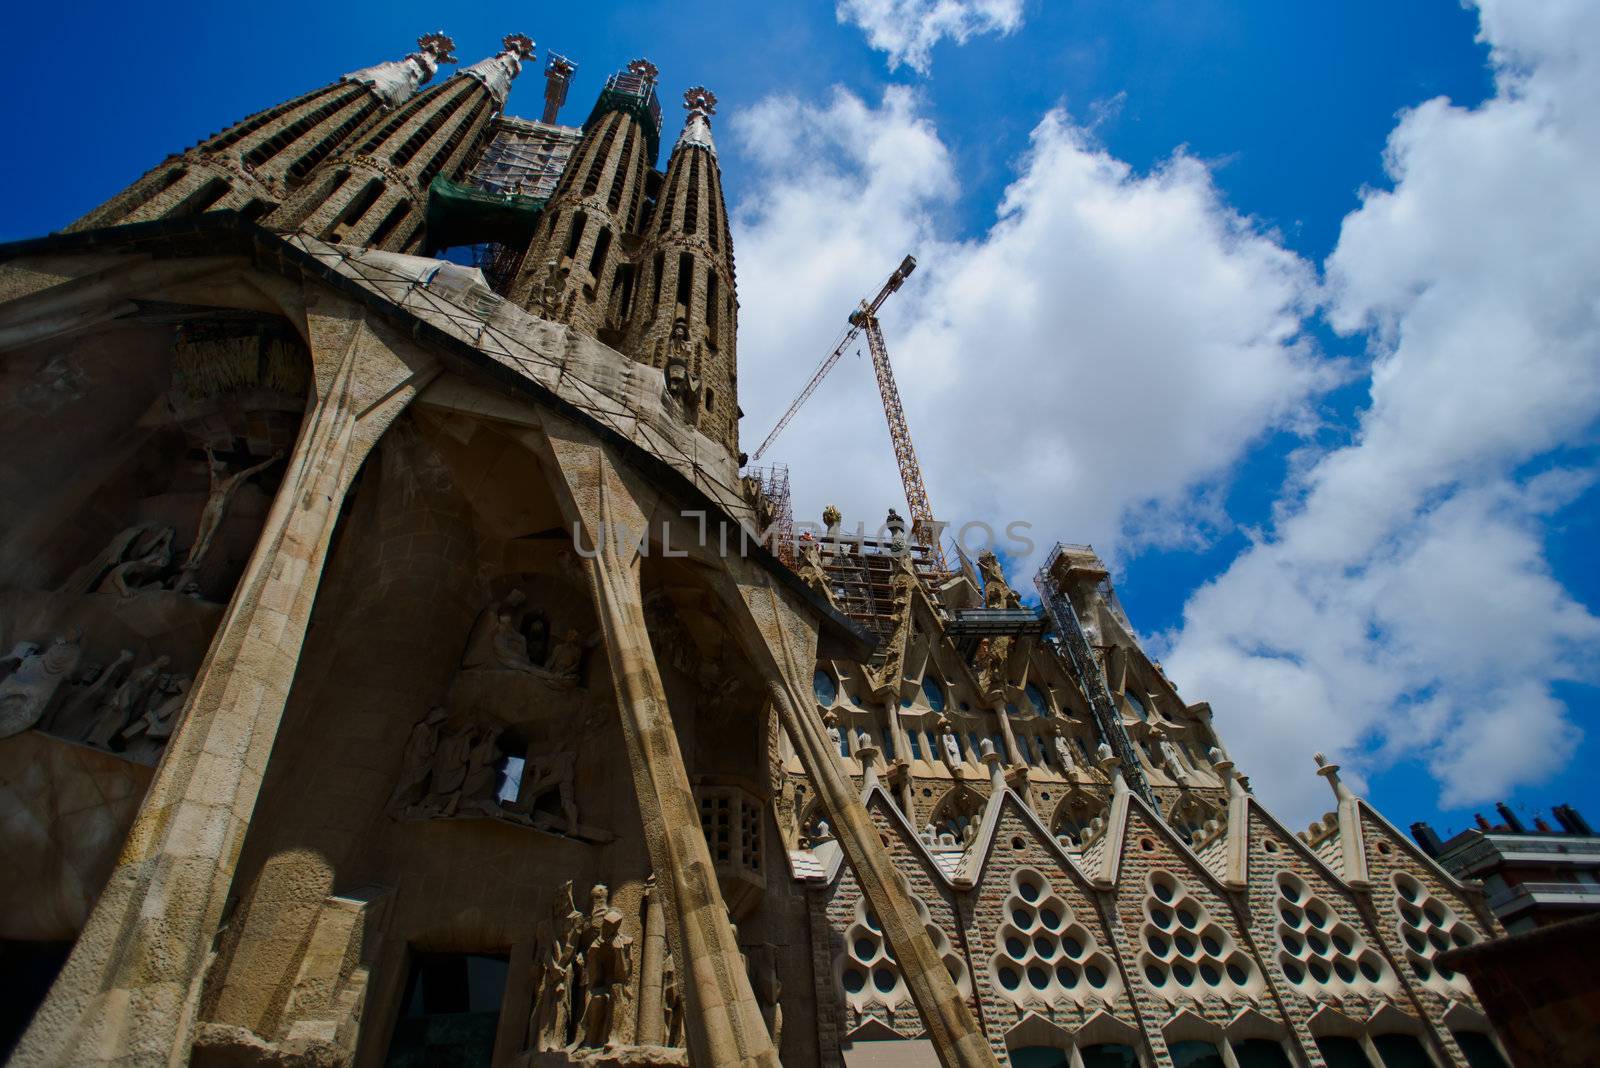 BARCELONA, SPAIN - JULY 13, 2012: Sagrada Familia on July 13: La Sagrada Familia - the impressive cathedral designed by Gaudi, which is being build since 19 March 1882 and is not finished yet.